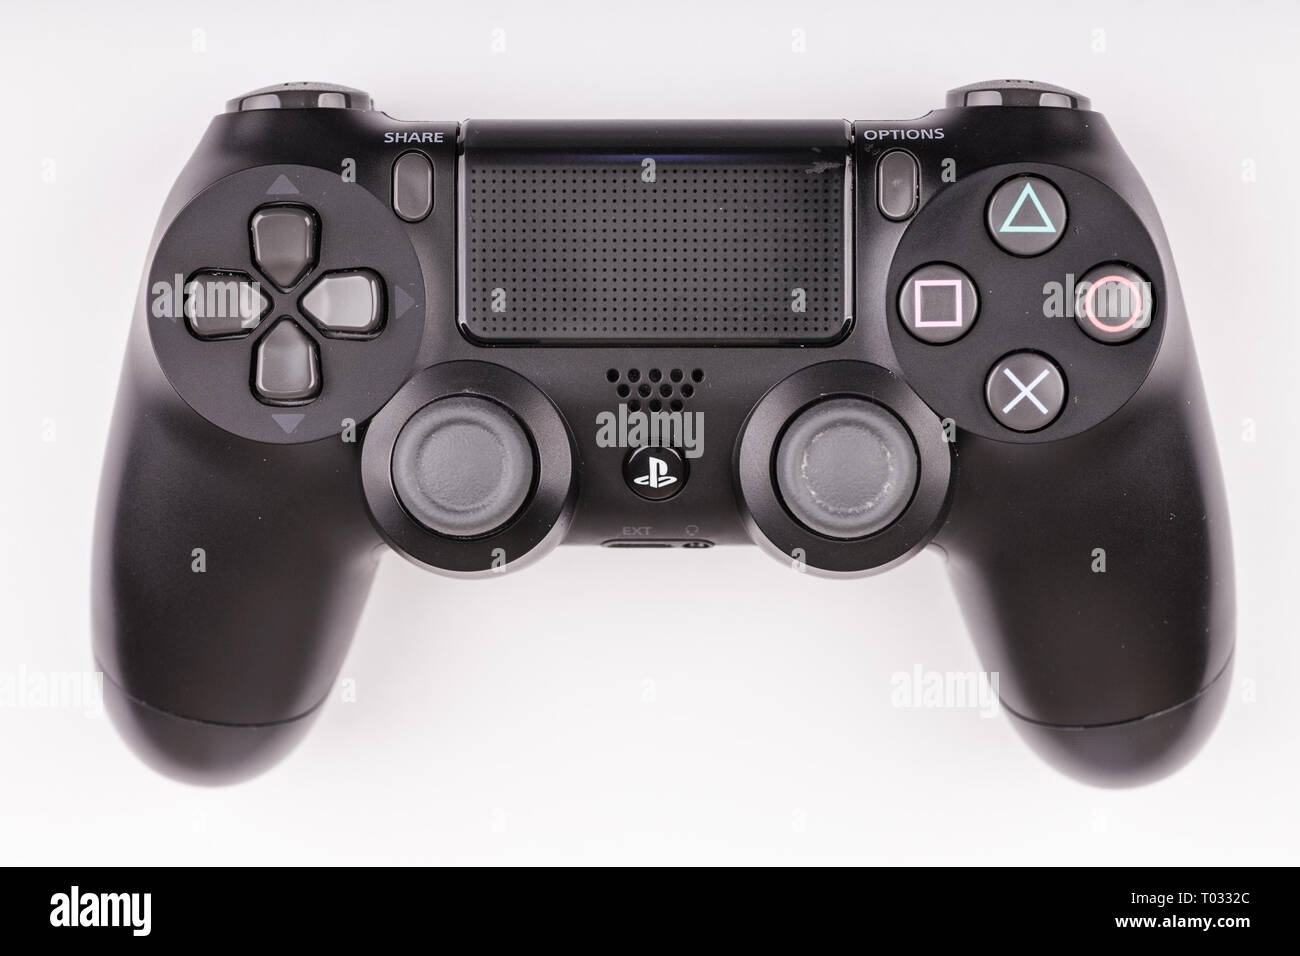 Ps4 Controller High Resolution Stock Photography and Images - Alamy